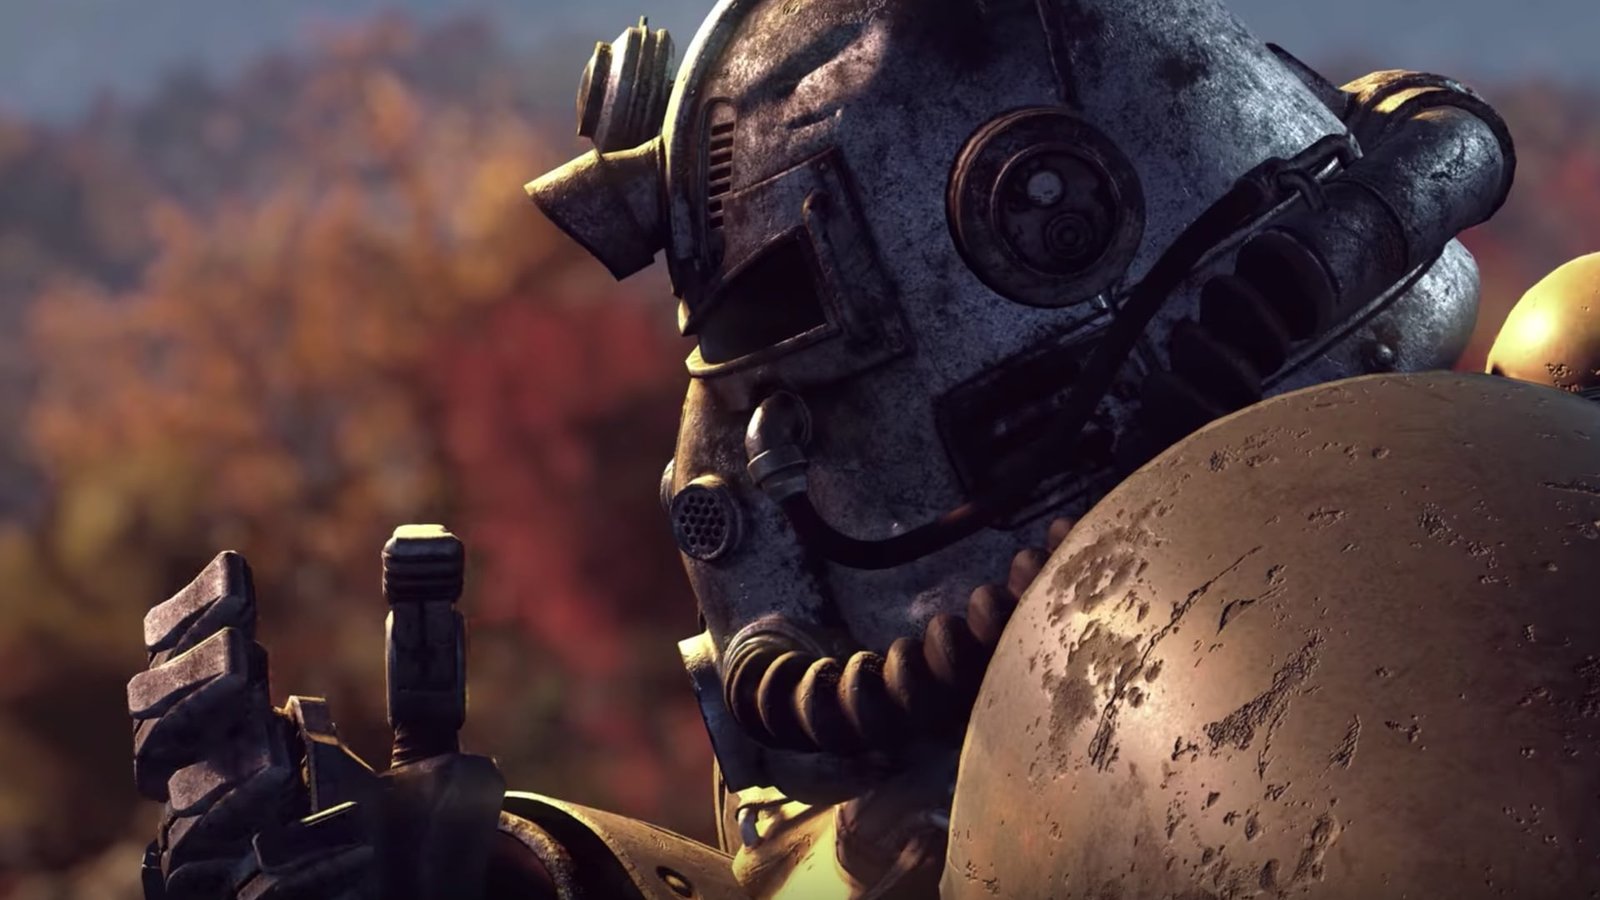 Review – Fallout 76